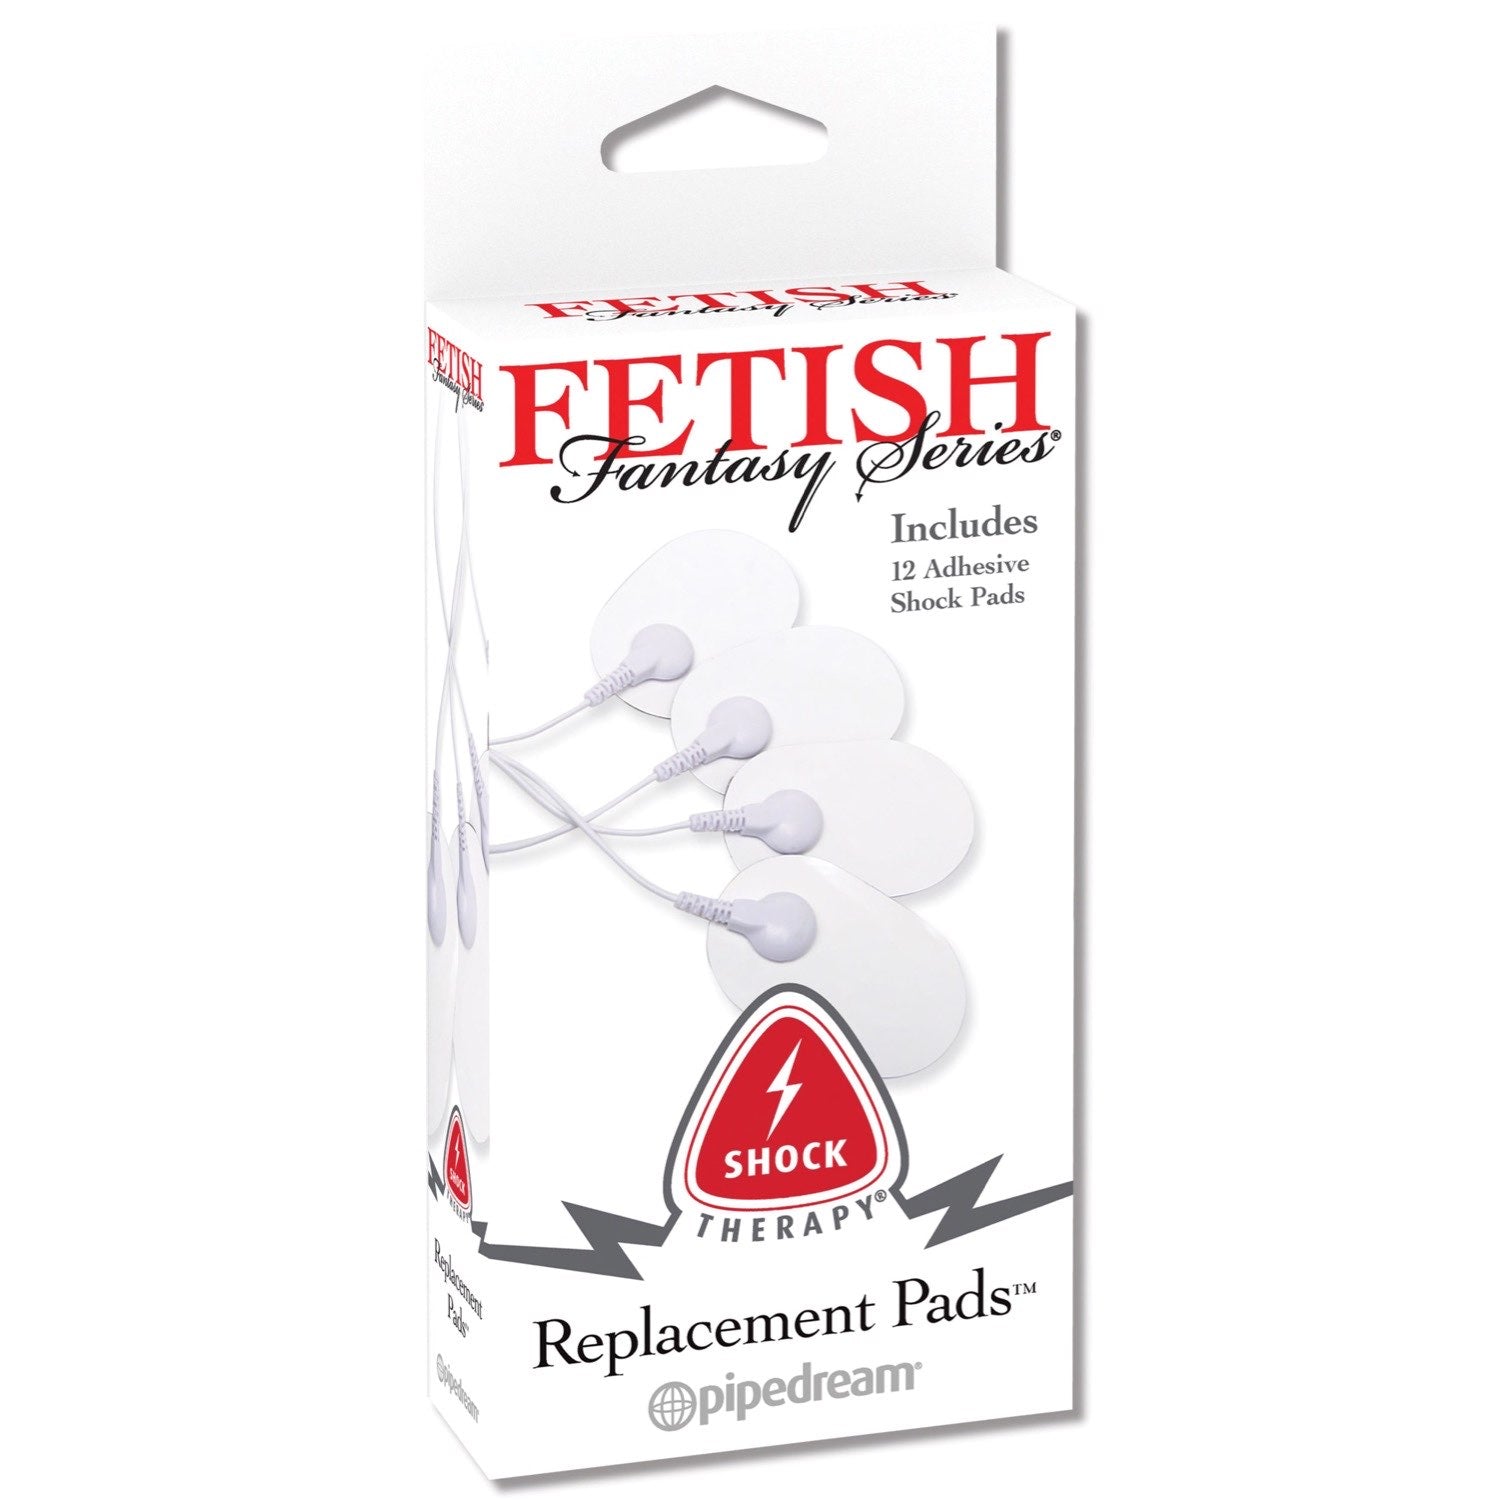 Fetish Fantasy Series Shock Therapy Replacement Pads - Replacement Pads for Shock Therapy Electrical Stimulator Kit - Set of 12 by Pipedream